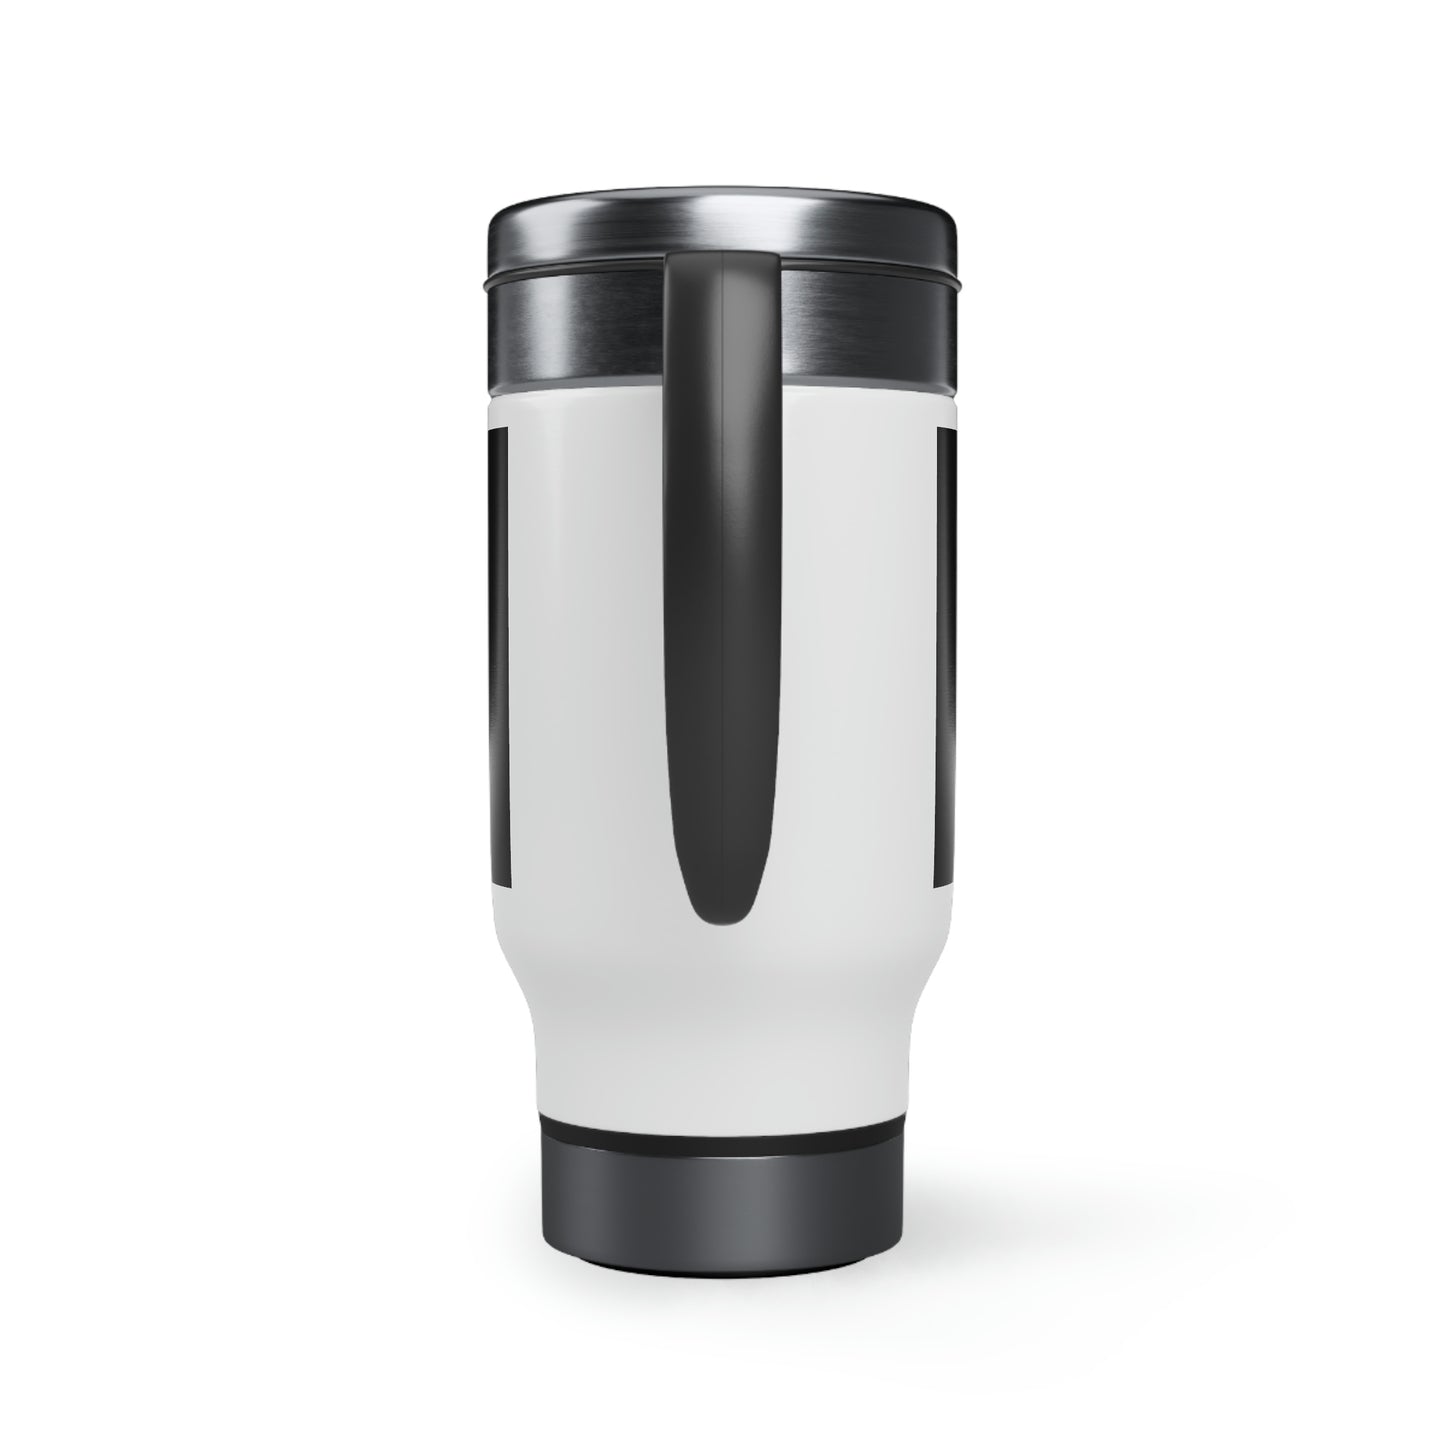 Shop Patron Stainless Steel Travel Mug with Handle, 14oz